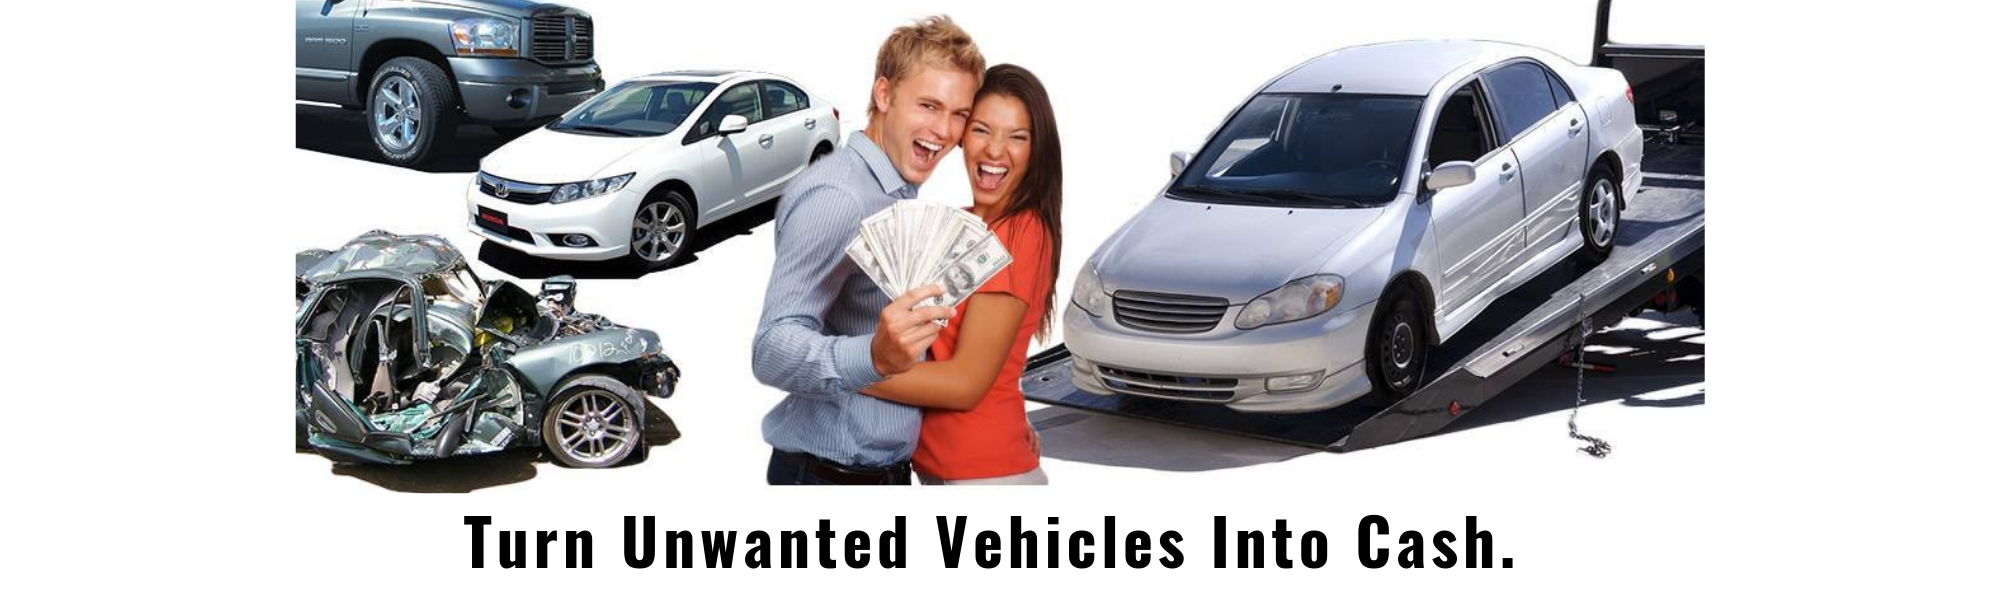 Turn Unwanted Vehicles Into Cash! 